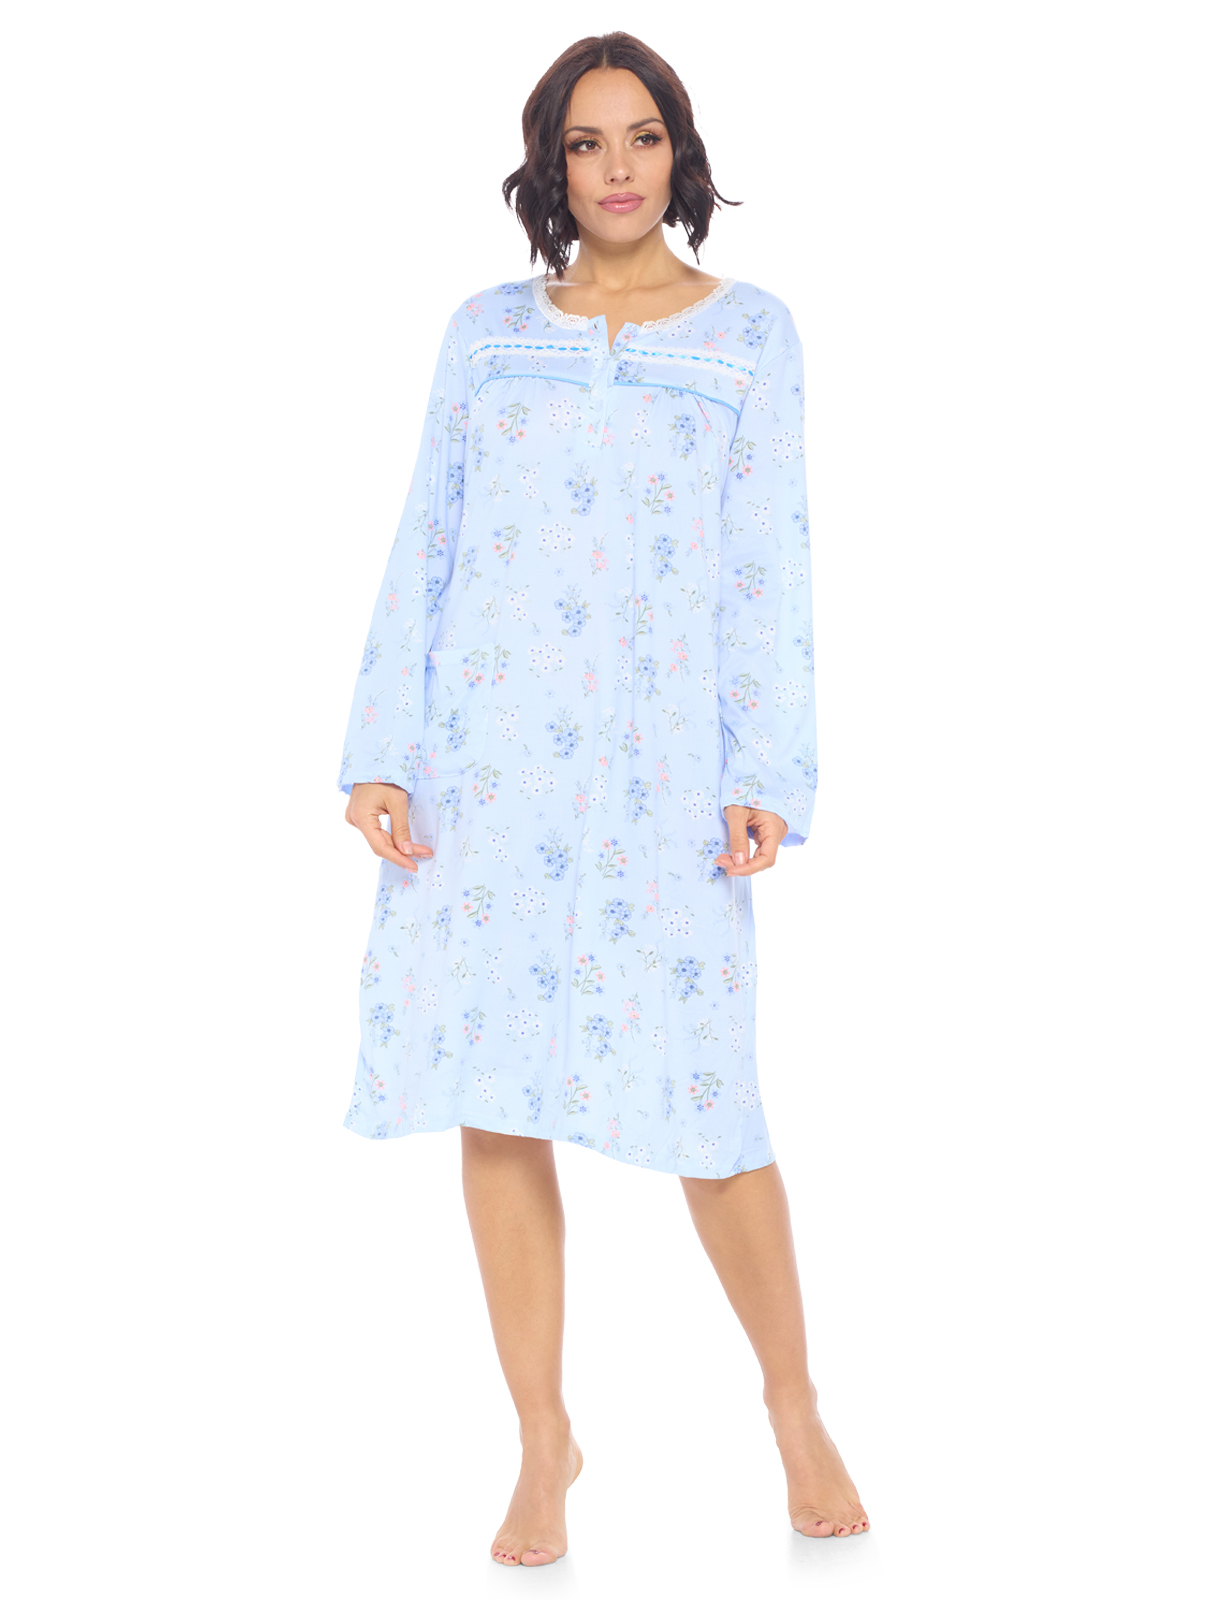 Casual Nights Women's Printed Long Sleeve Nightgown - Blue LA6014BL